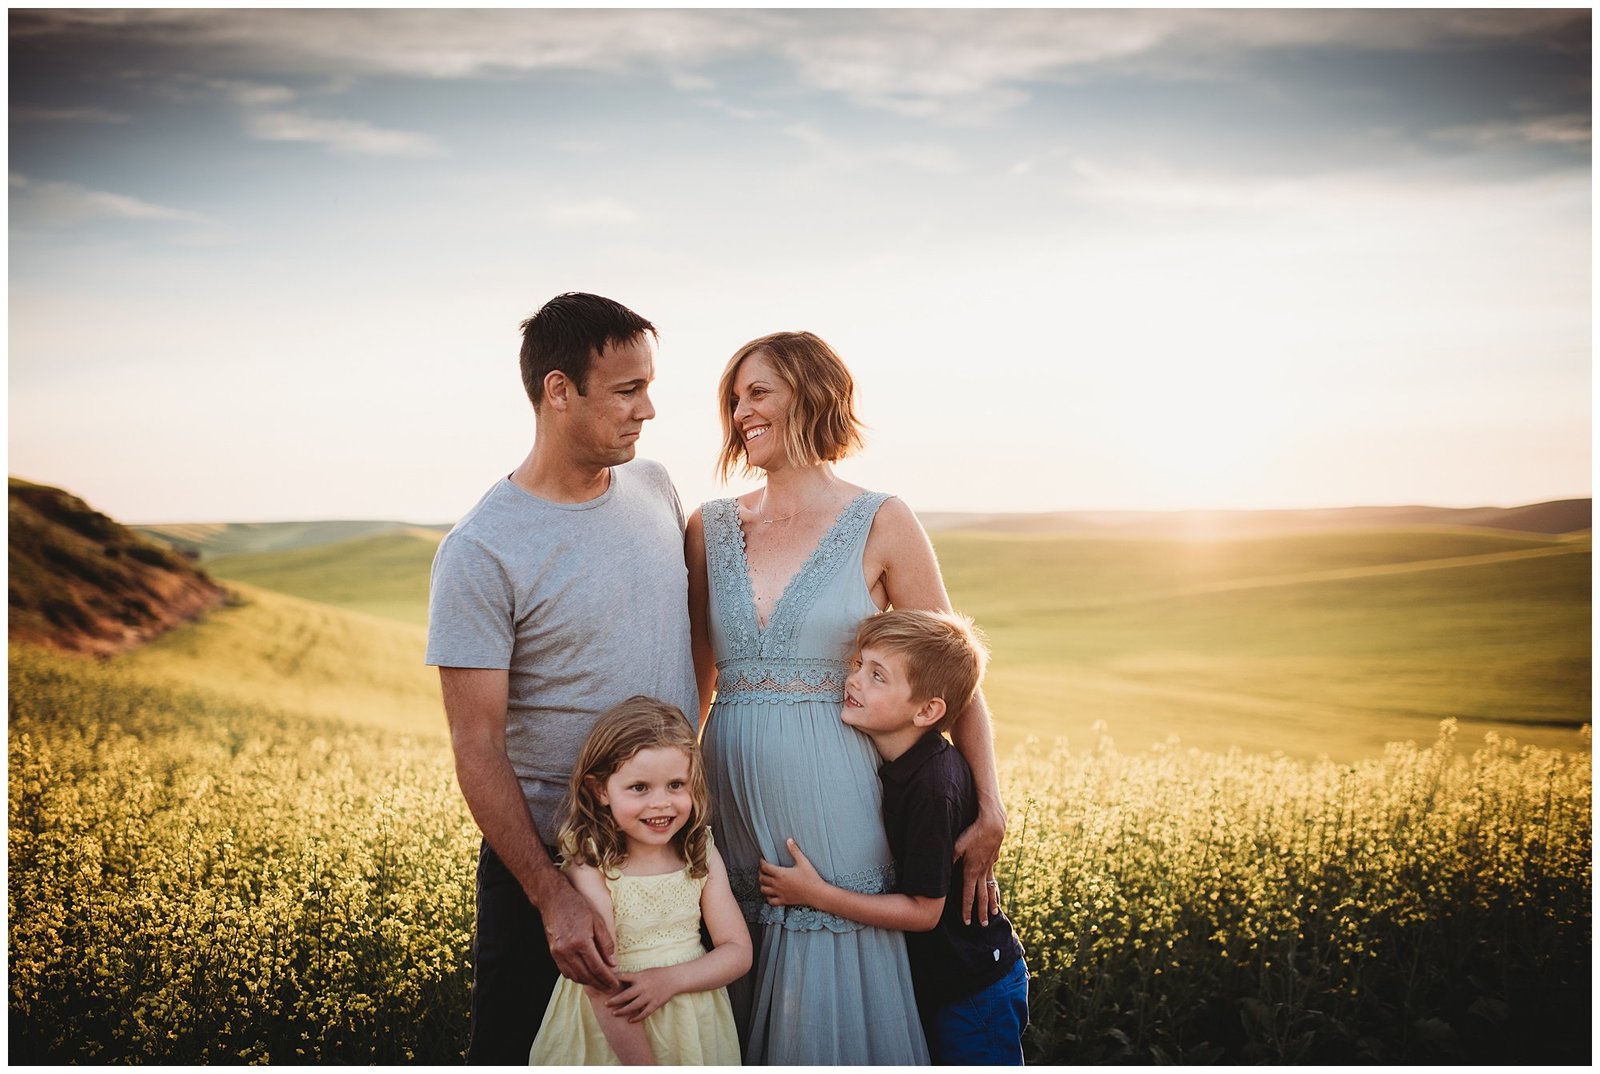 family photos at sunset in field of yellow flowers Emily Ann Photography Seattle Family Photographer